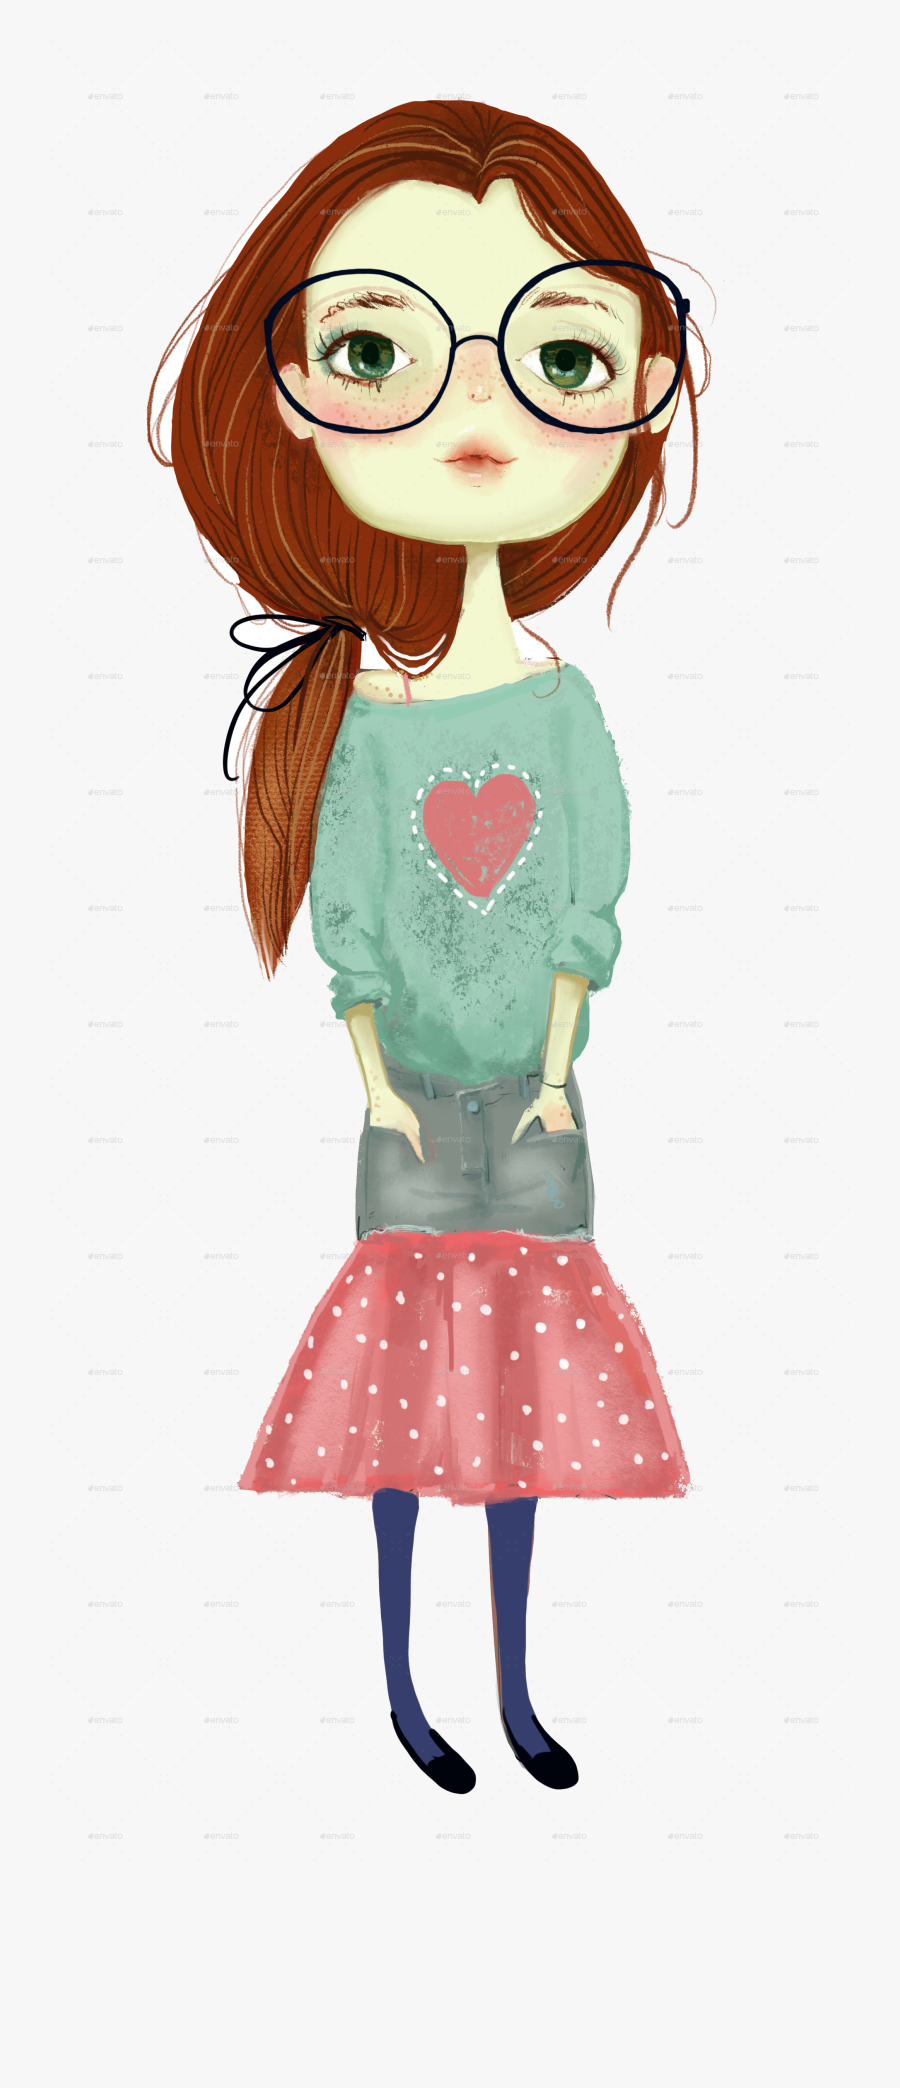 Cartoon Girls Pictures - Animation Pic 6 Girls, Transparent Clipart